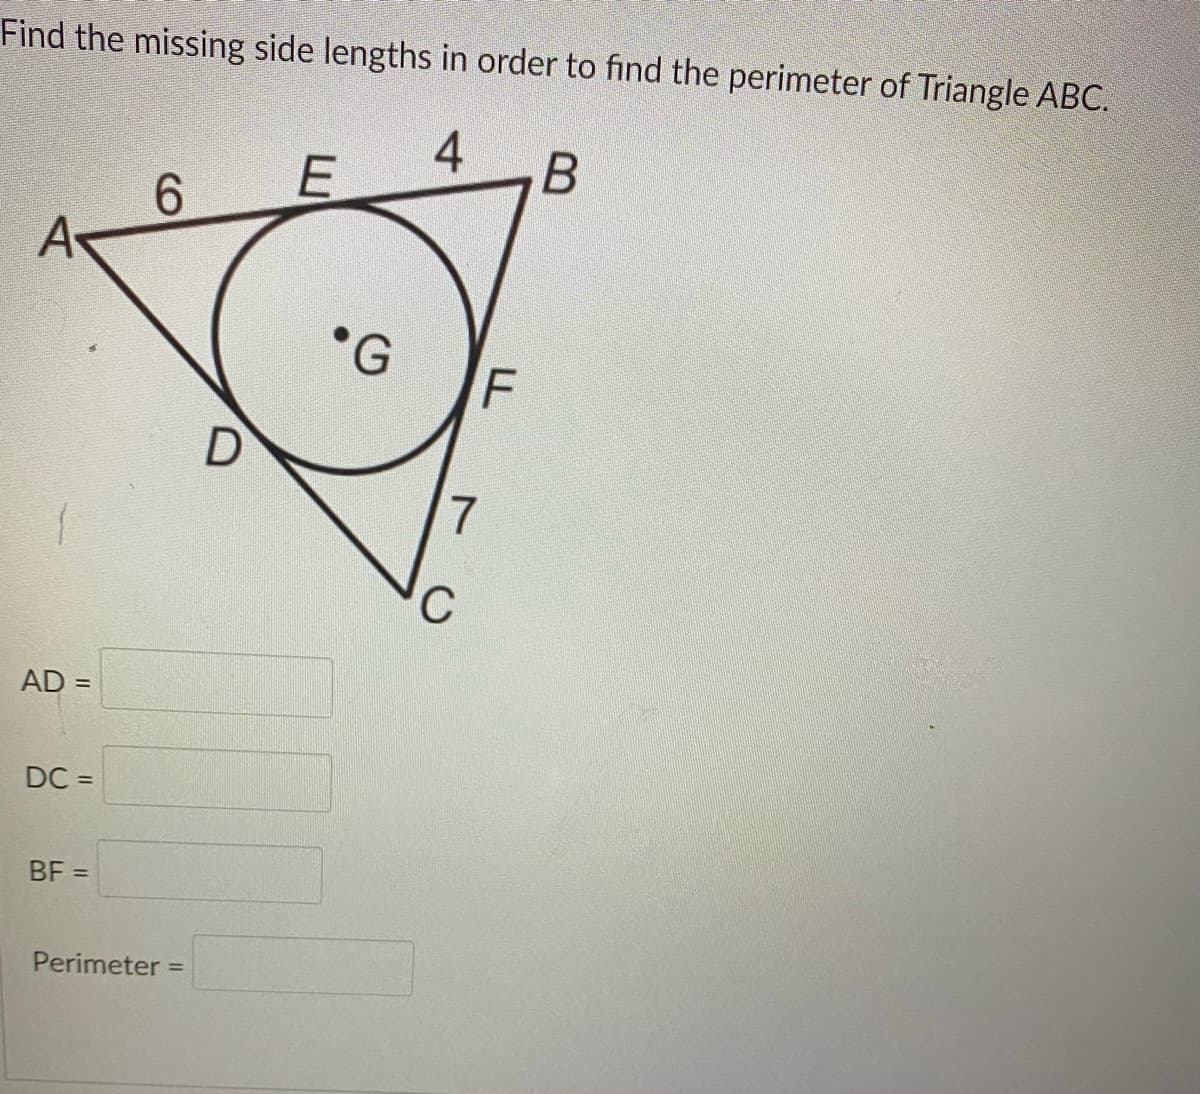 Find the missing side lengths in order to find the perimeter of Triangle ABC.
4
6.
A
•G
C
AD =
%3D
DC =
BF =
Perimeter =
